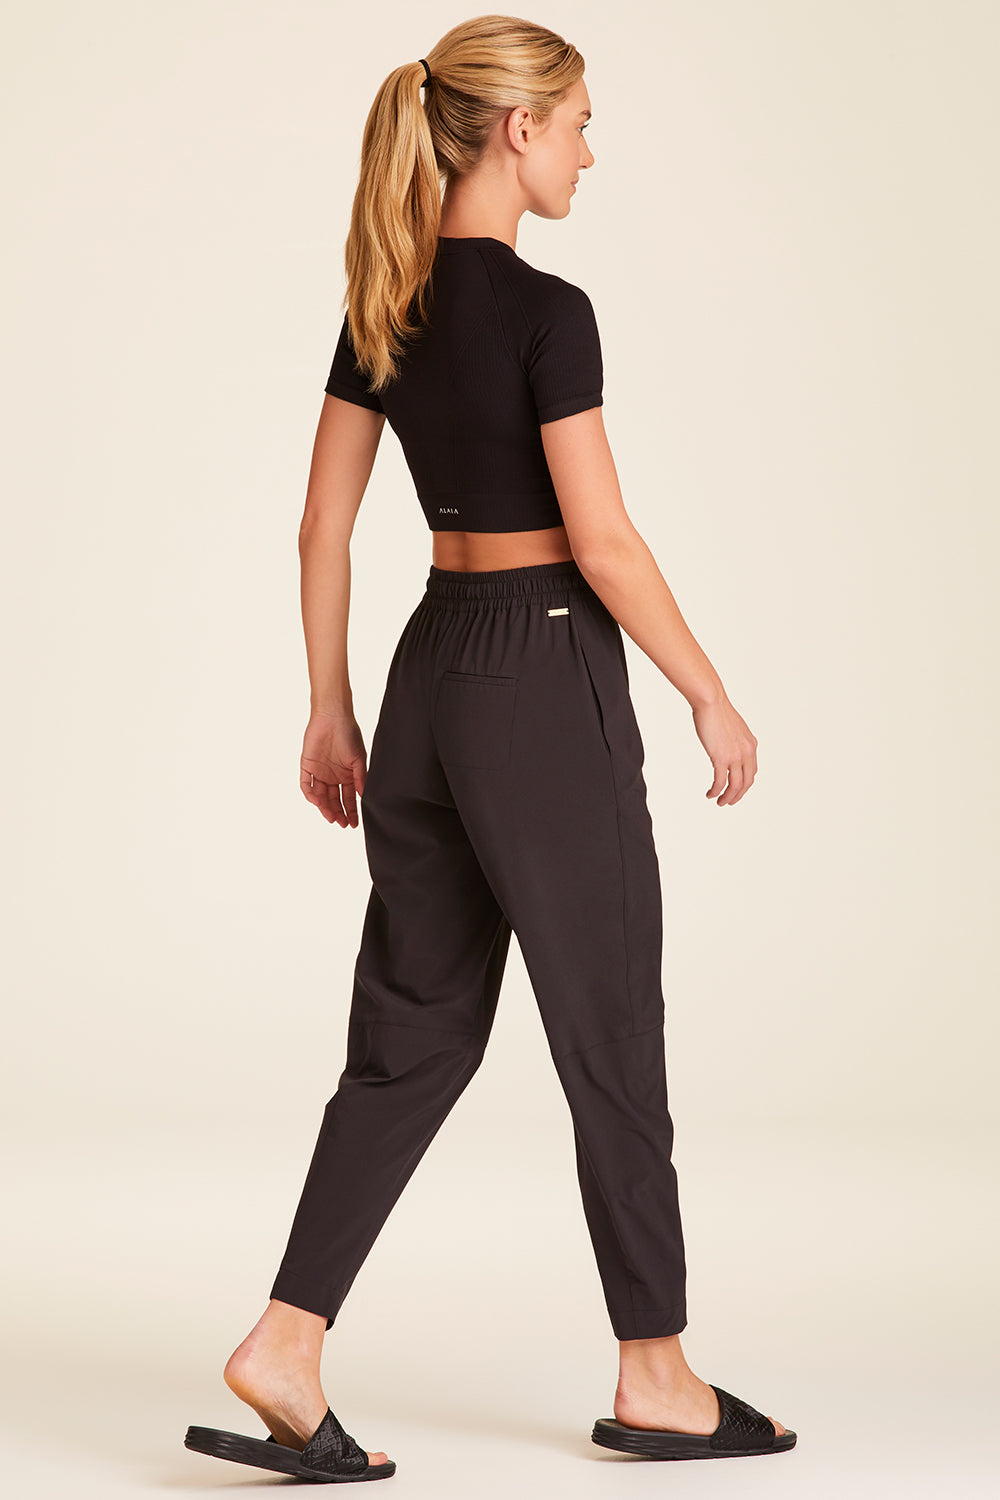 Full body back view of Alala Luxury Women's Athleisure commuter pant in black